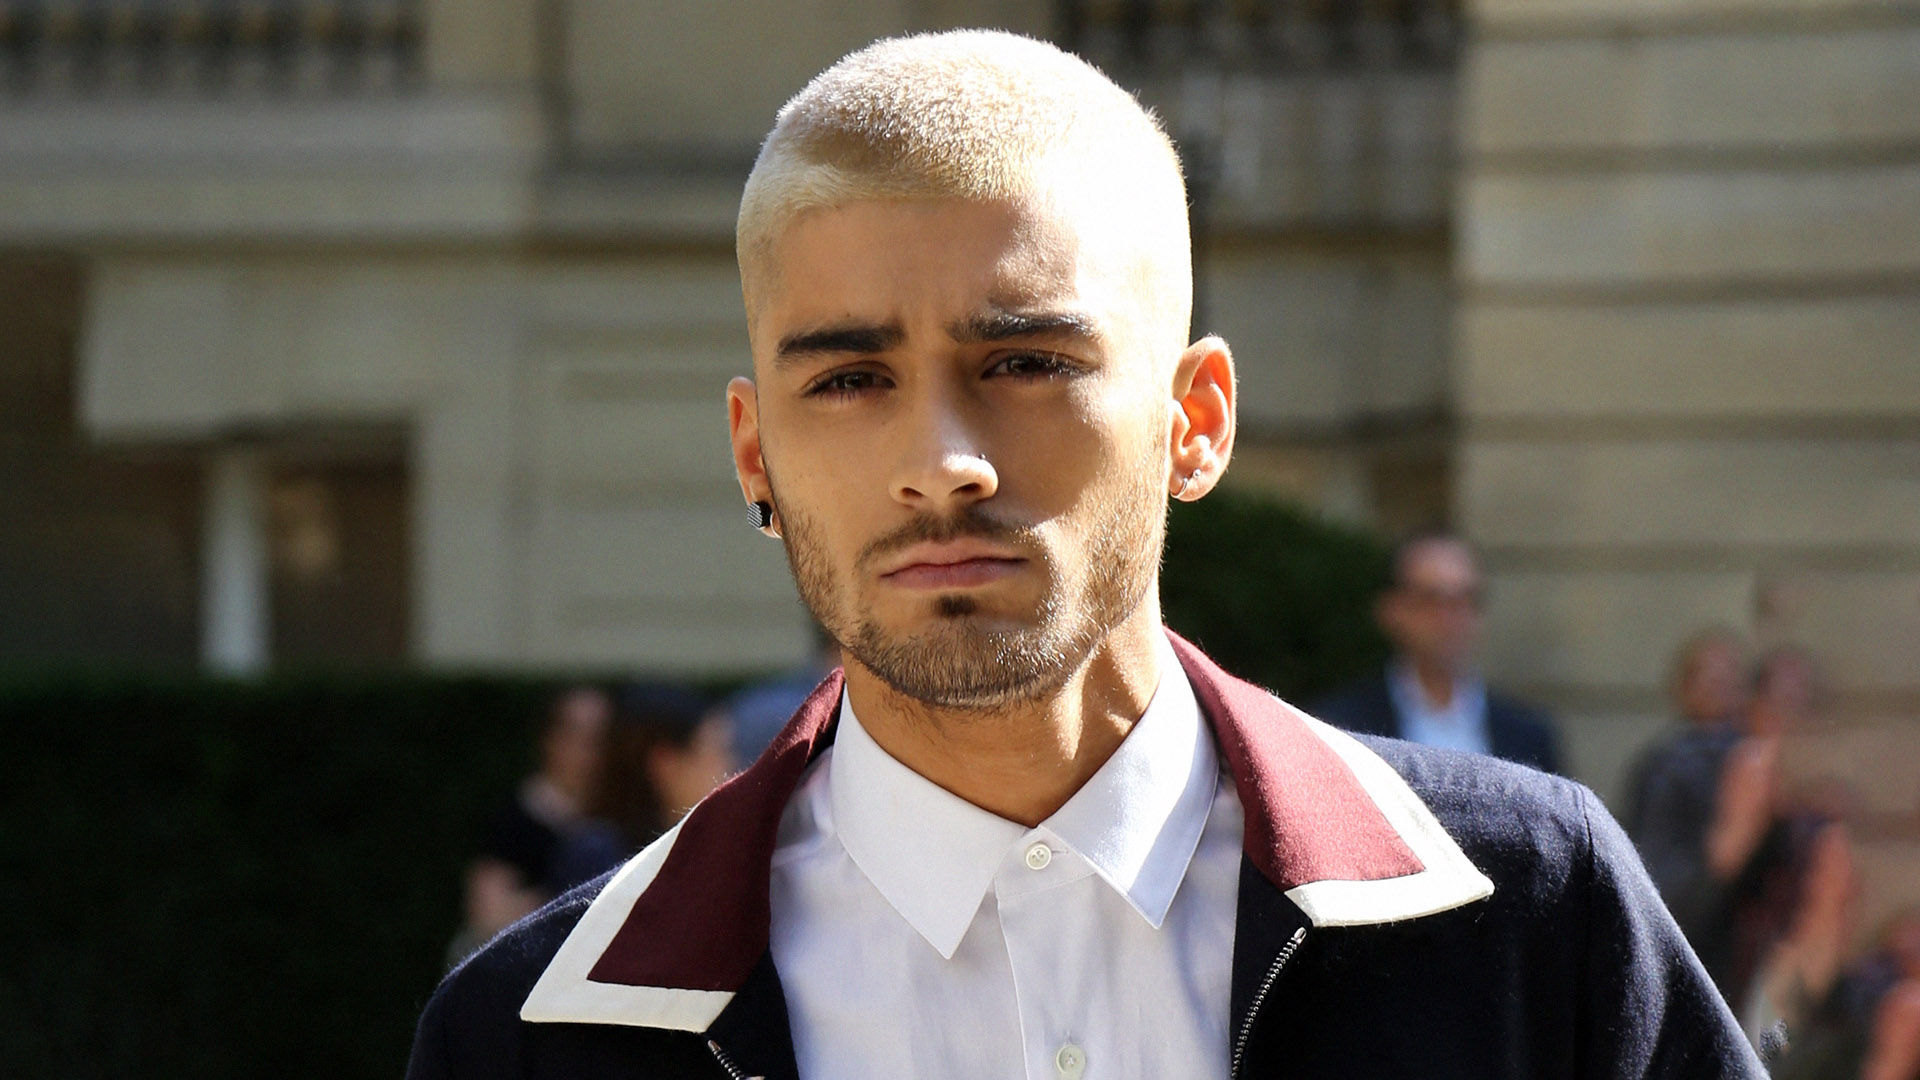 Behind-the-Scenes Drama That Led to Zayn Leaving One Direction